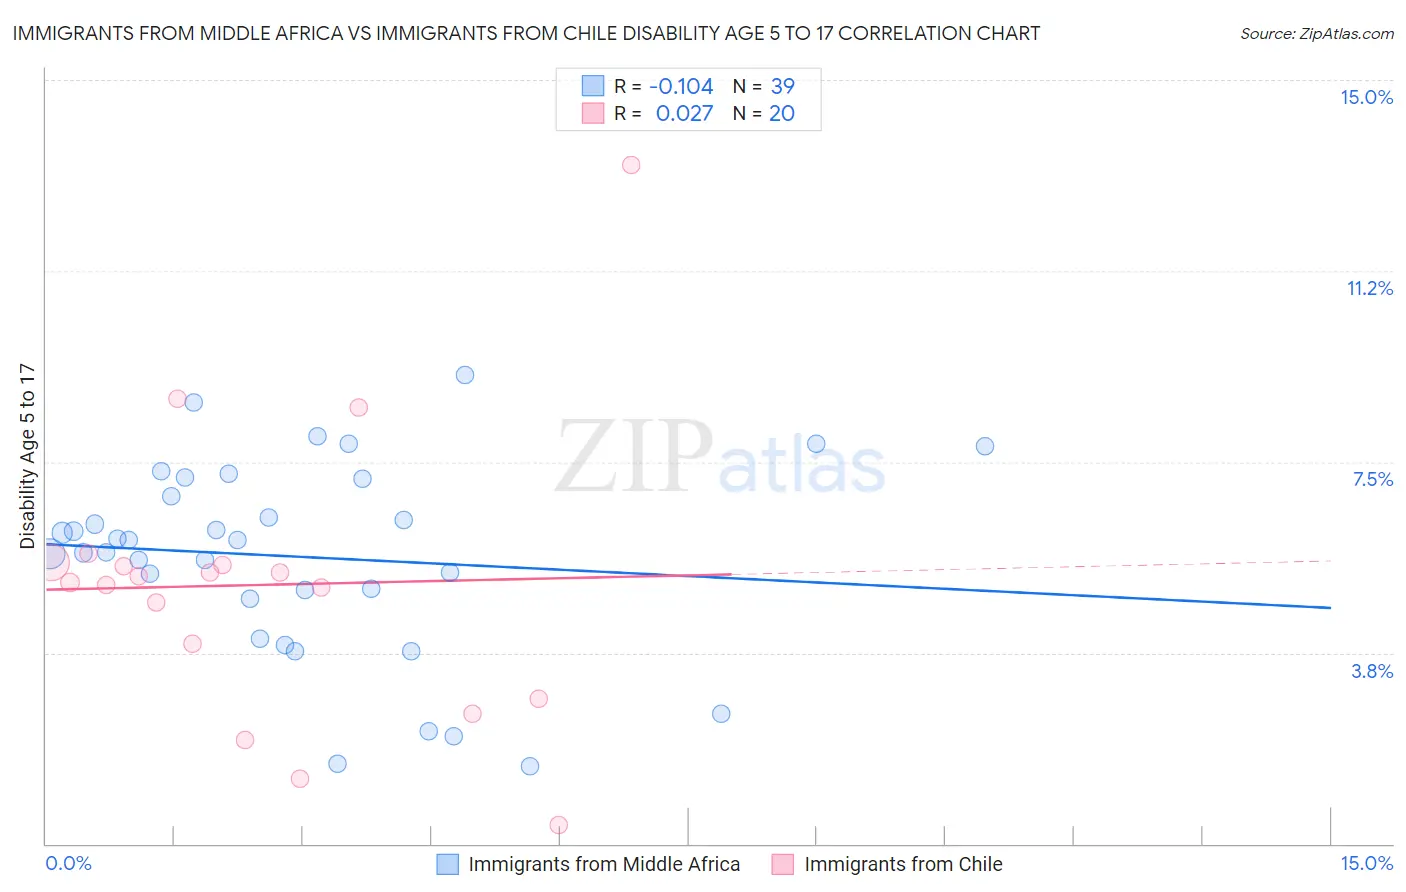 Immigrants from Middle Africa vs Immigrants from Chile Disability Age 5 to 17